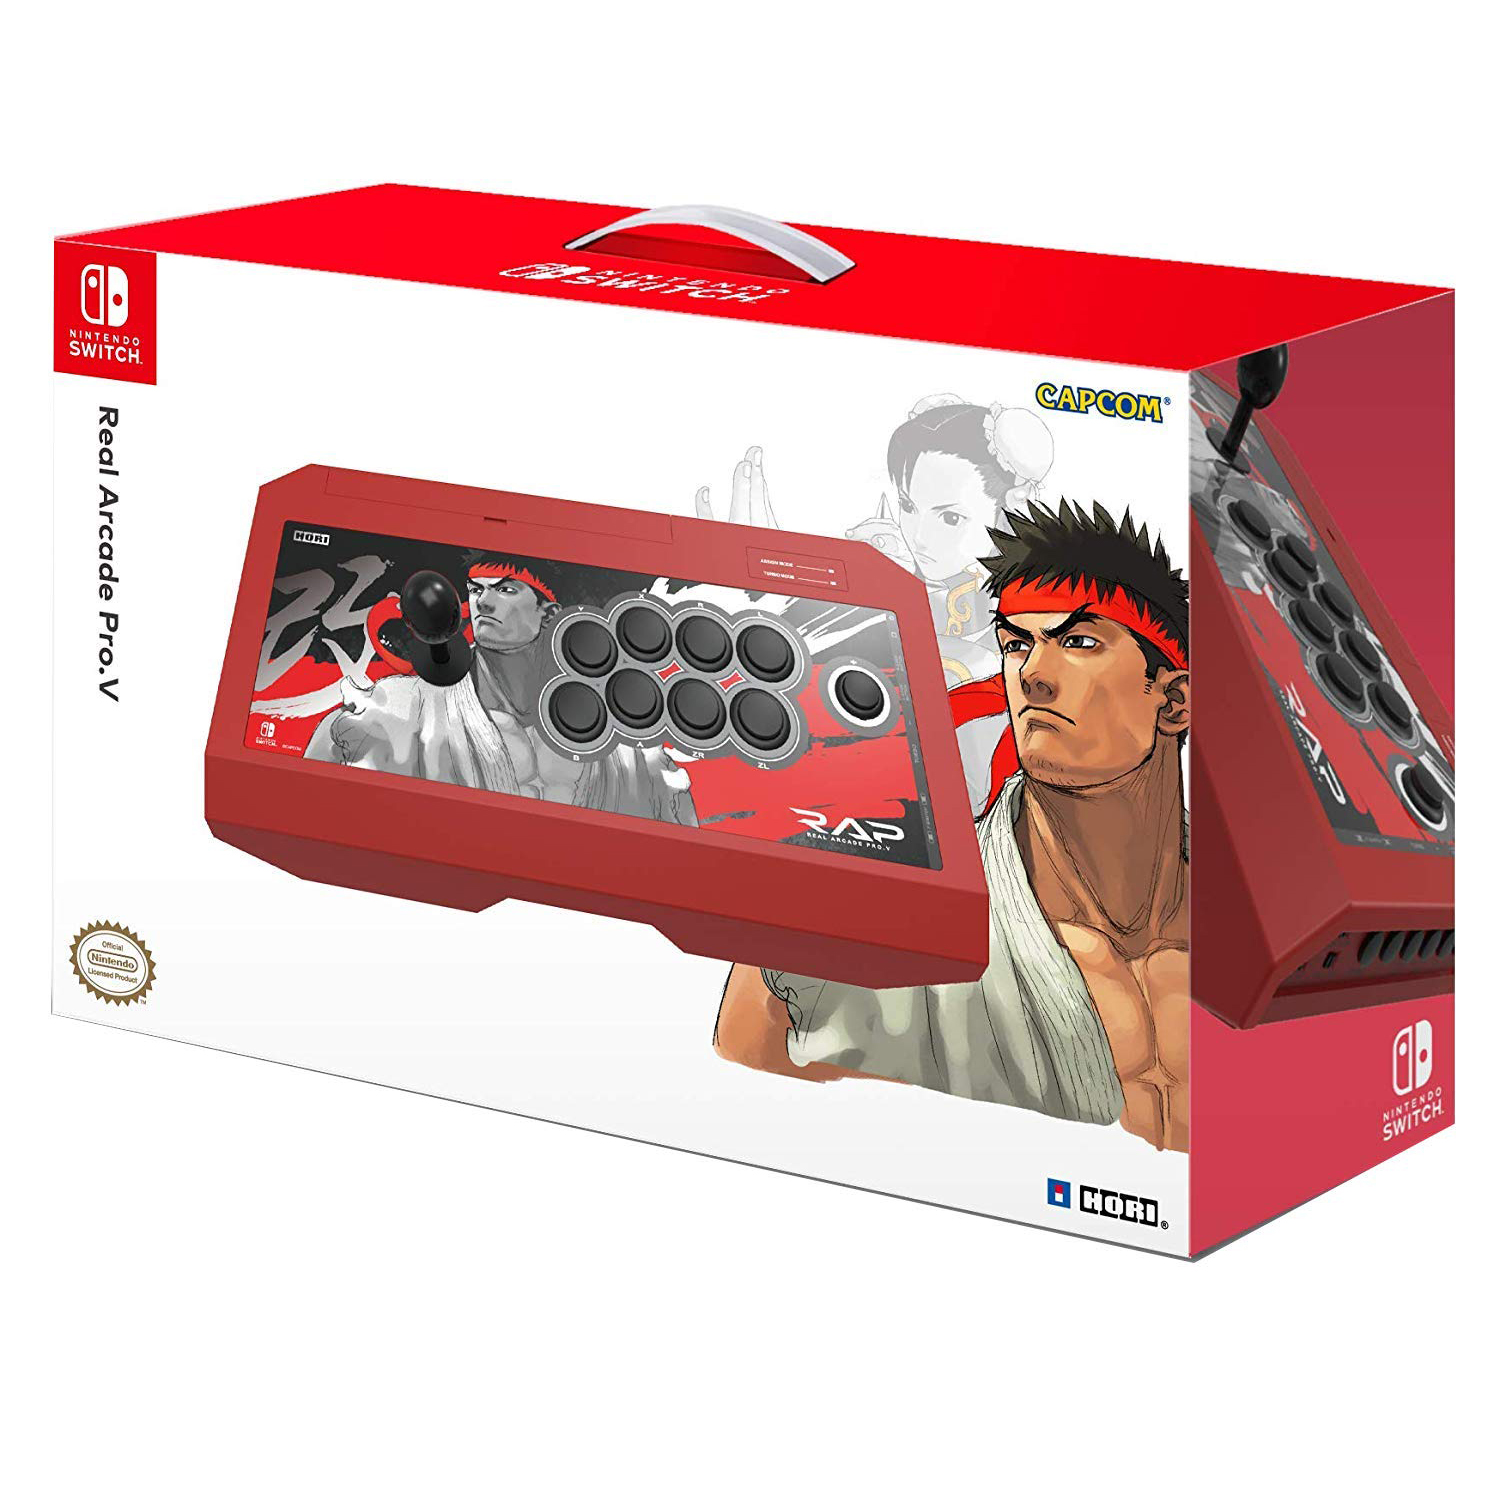 Hori - Street Fighter II - RYU Edition, Real Arcade Pro.V, Nintendo Switch and PC, USB Video Game Fight Sticks - image 1 of 1